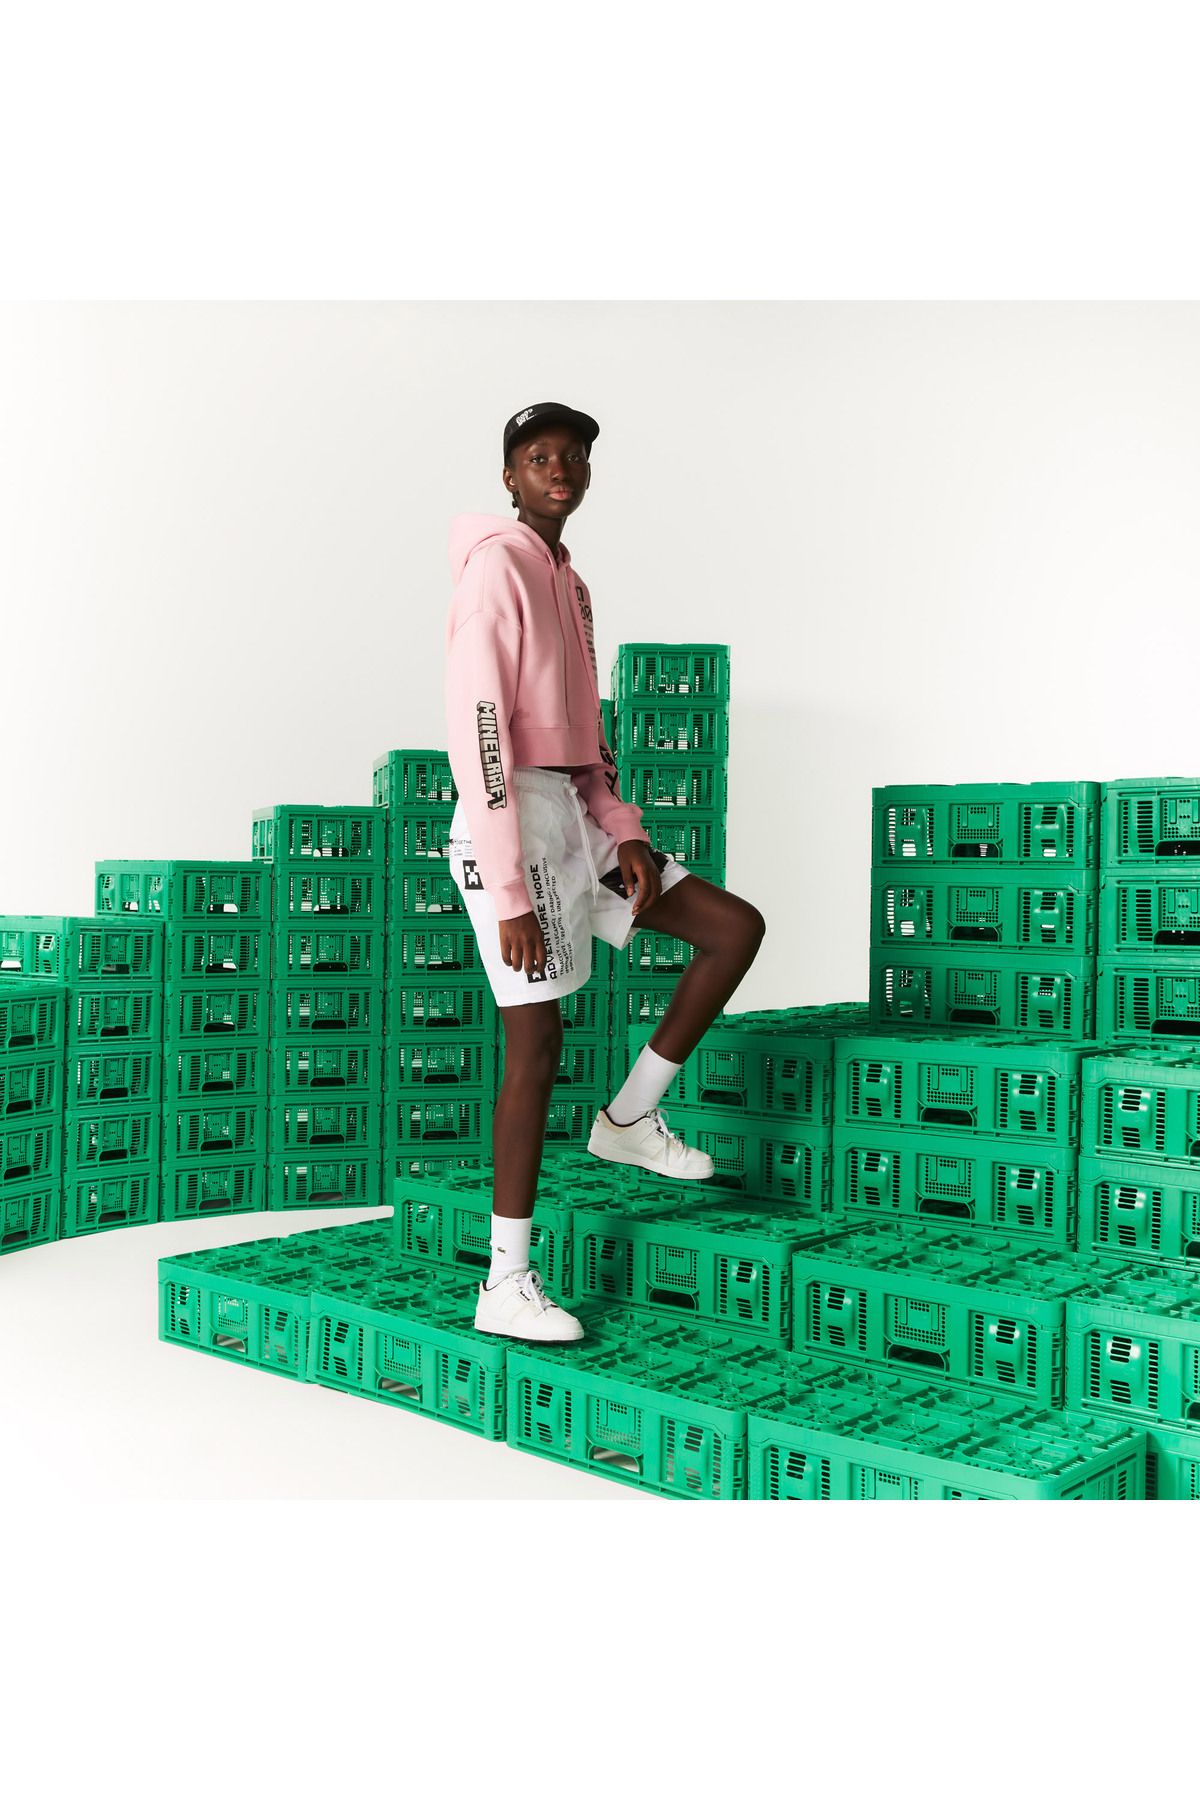 Lacoste X Minecraft Fit Hasted Sweatryrt